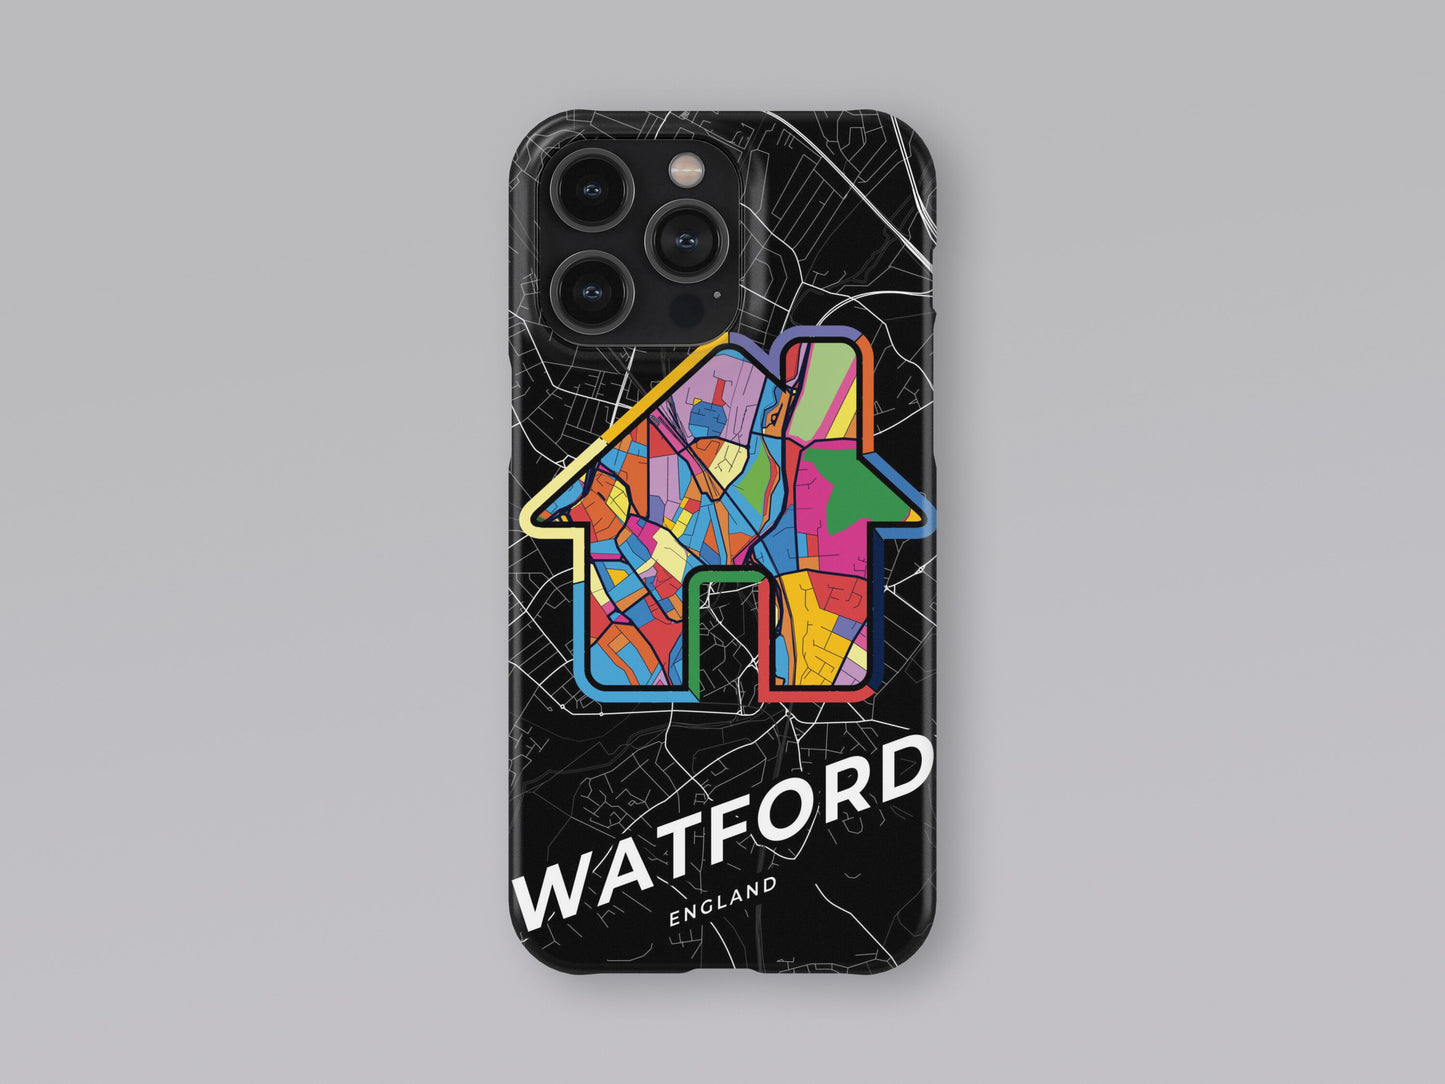 Watford England slim phone case with colorful icon 3